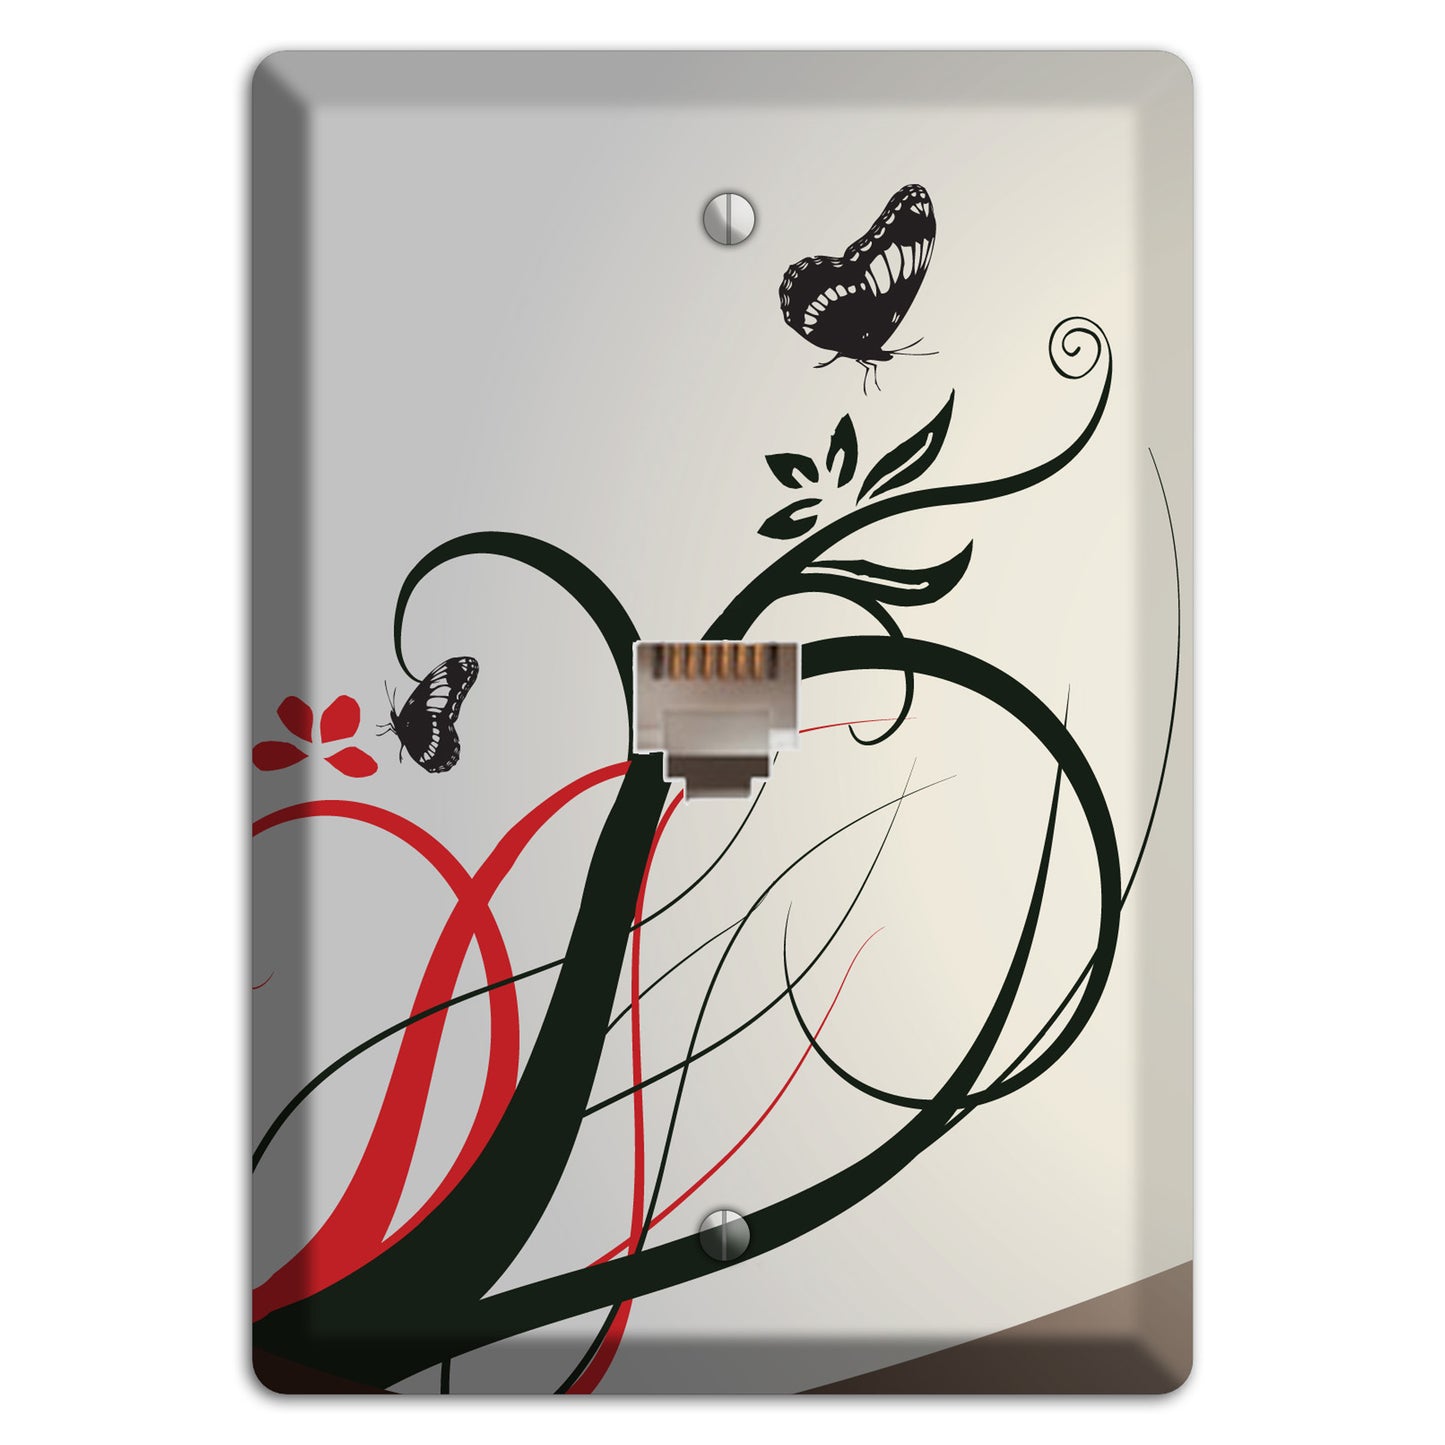 Grey and Red Floral Sprig with Butterfly Phone Wallplate